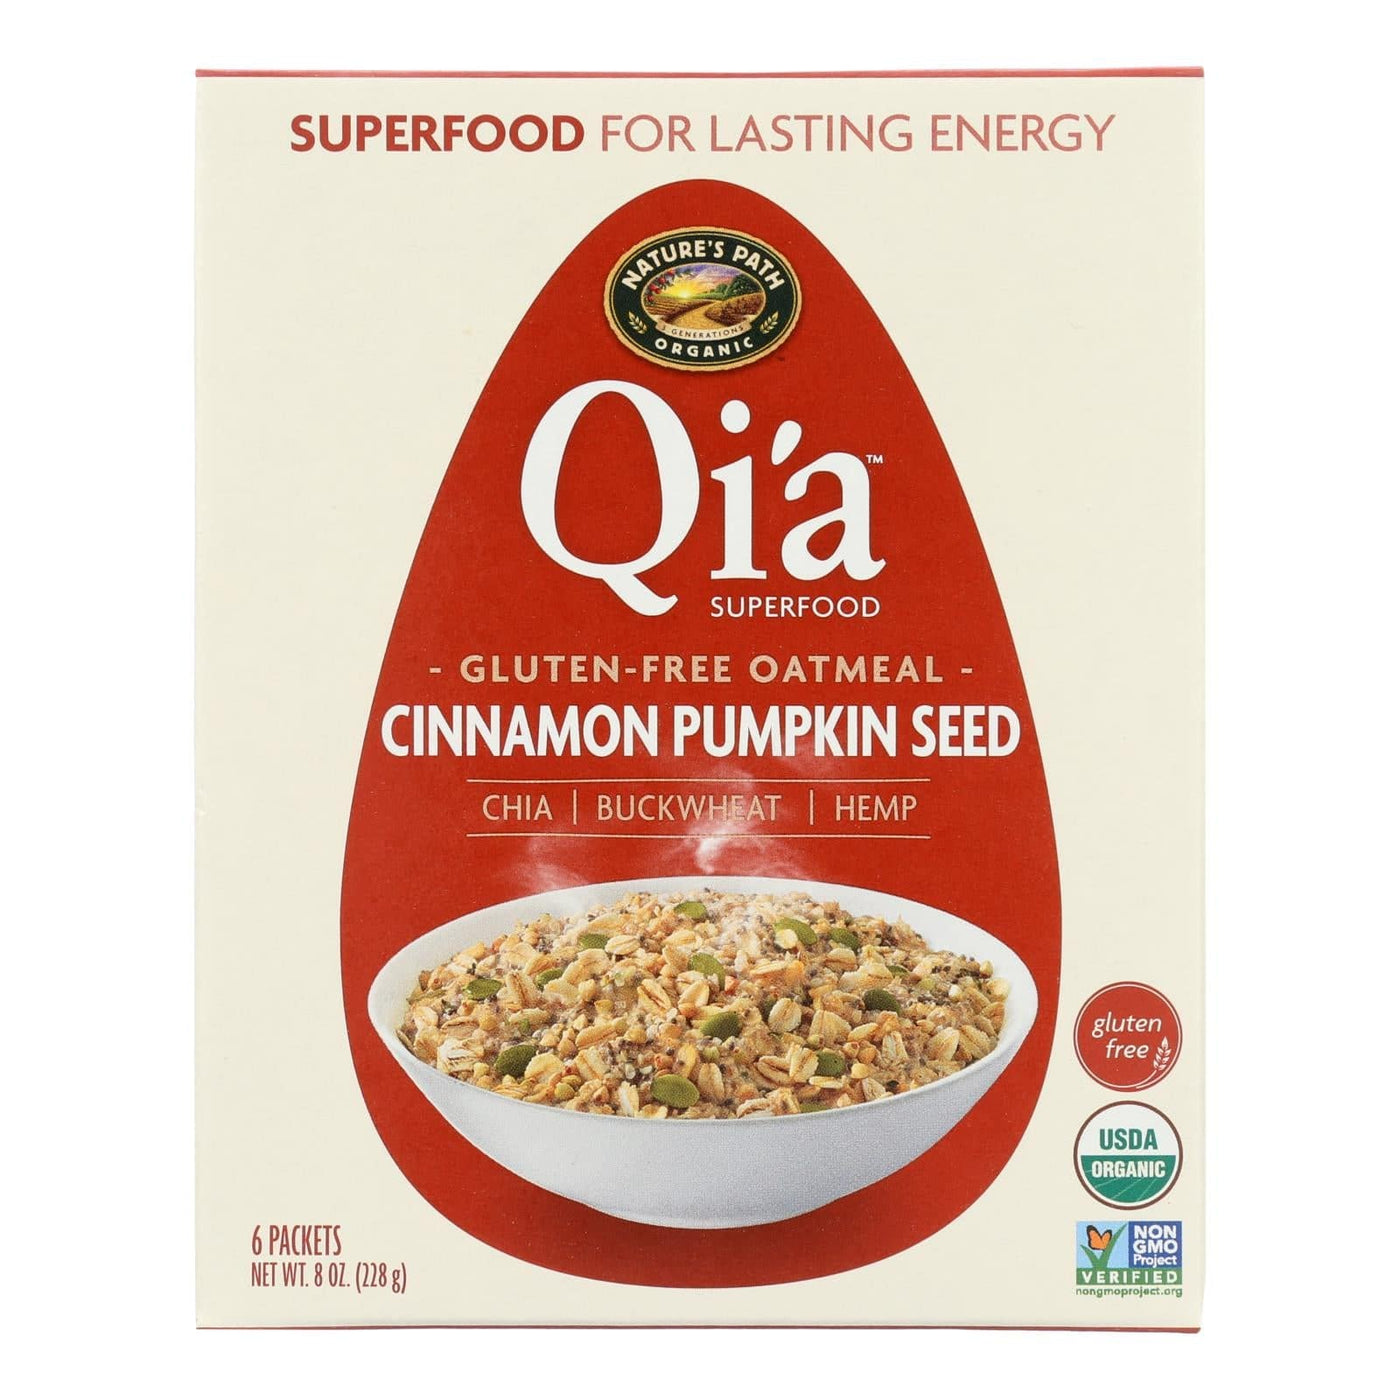 Nature's Path Organic Qi'a Superfood Hot Oatmeal - Cinnamon Pumpkin Seed - Case Of 6 - 8 Oz. | OnlyNaturals.us